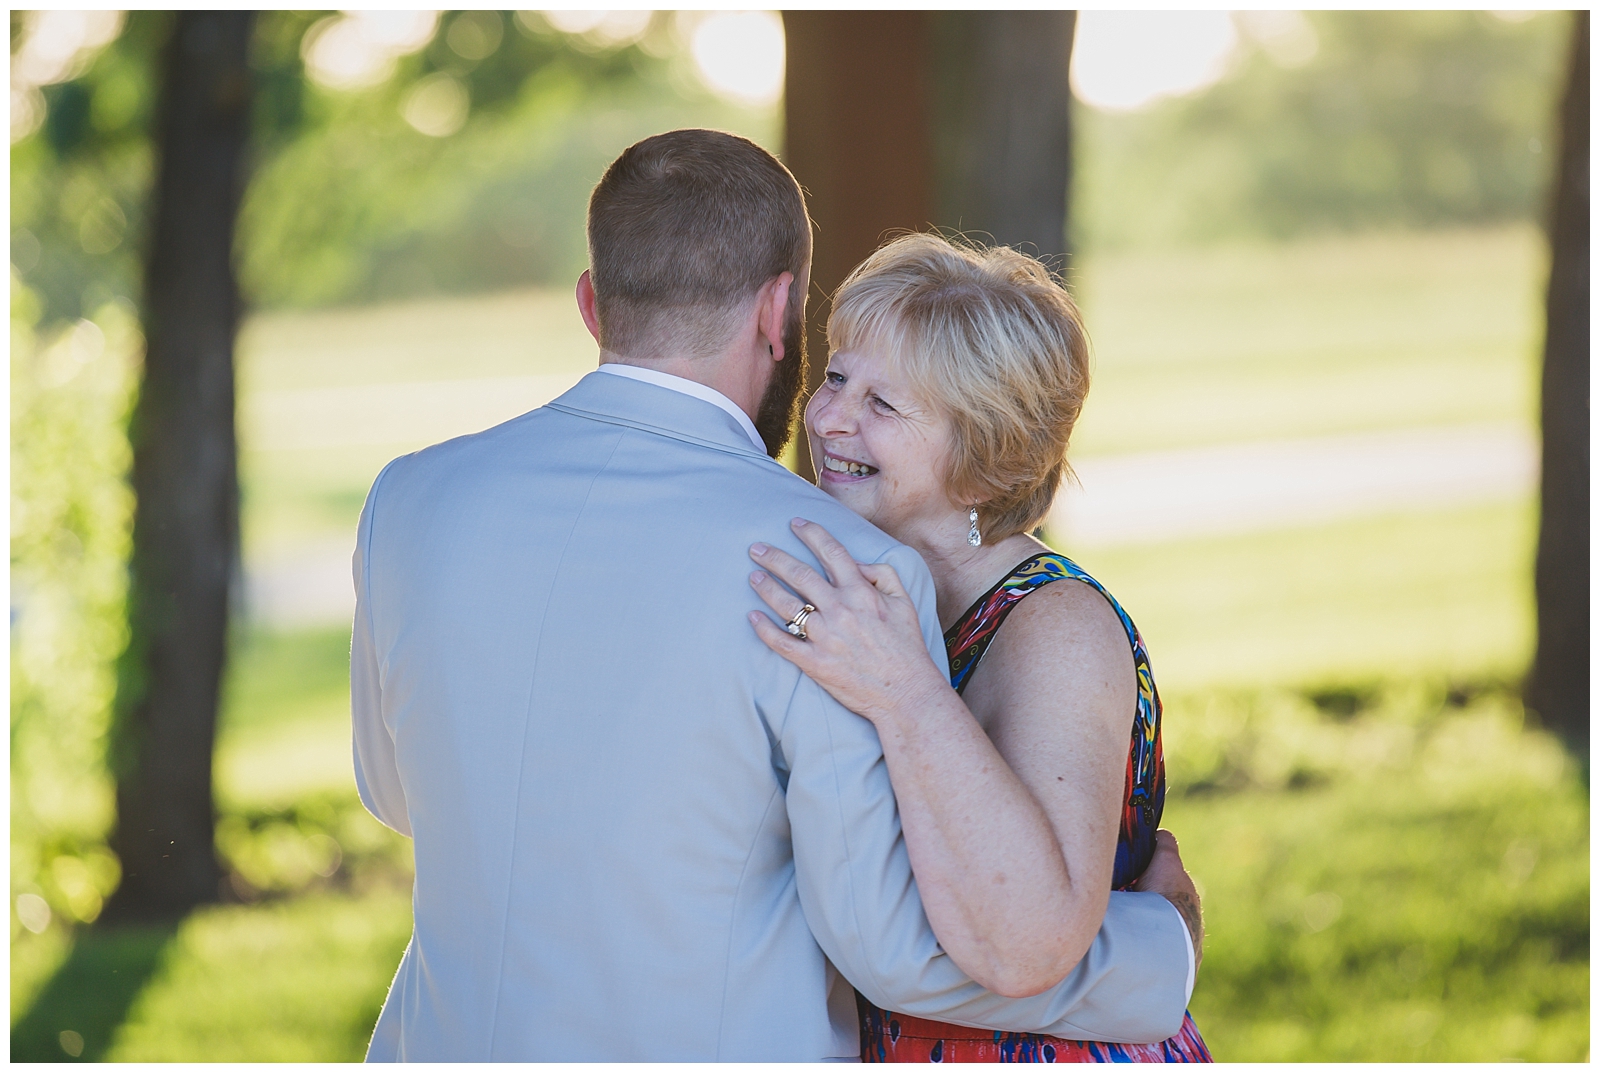 Wedding photography at Theatre in the Park in Shawnee, Kansas, by Kansas City wedding photographers Wisdom-Watson Weddings.